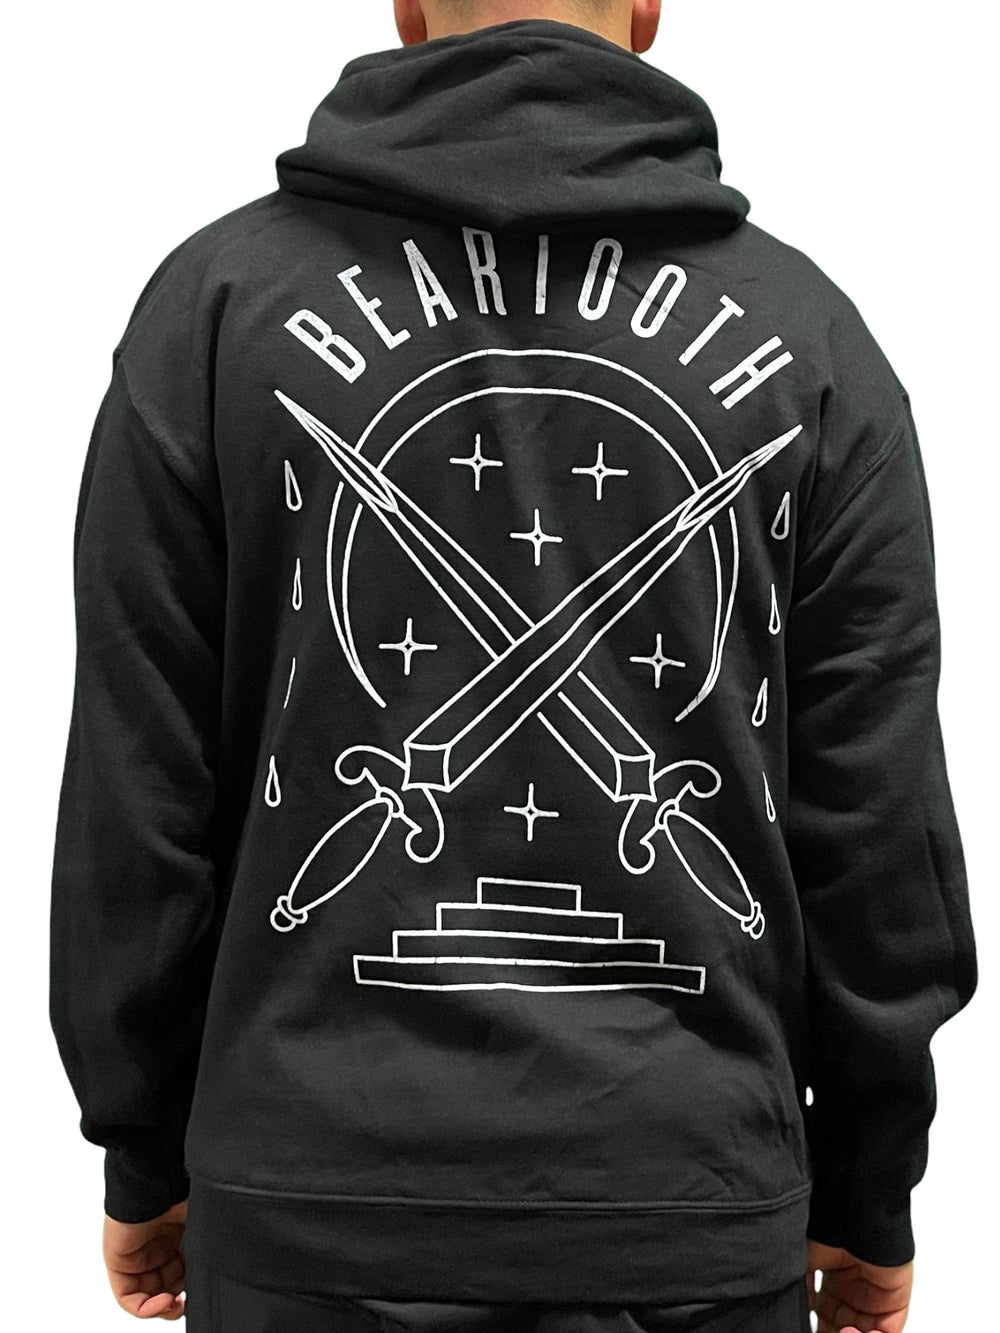 Beartooth Daggers Pullover Hoodie Unisex Official Brand New Various Sizes